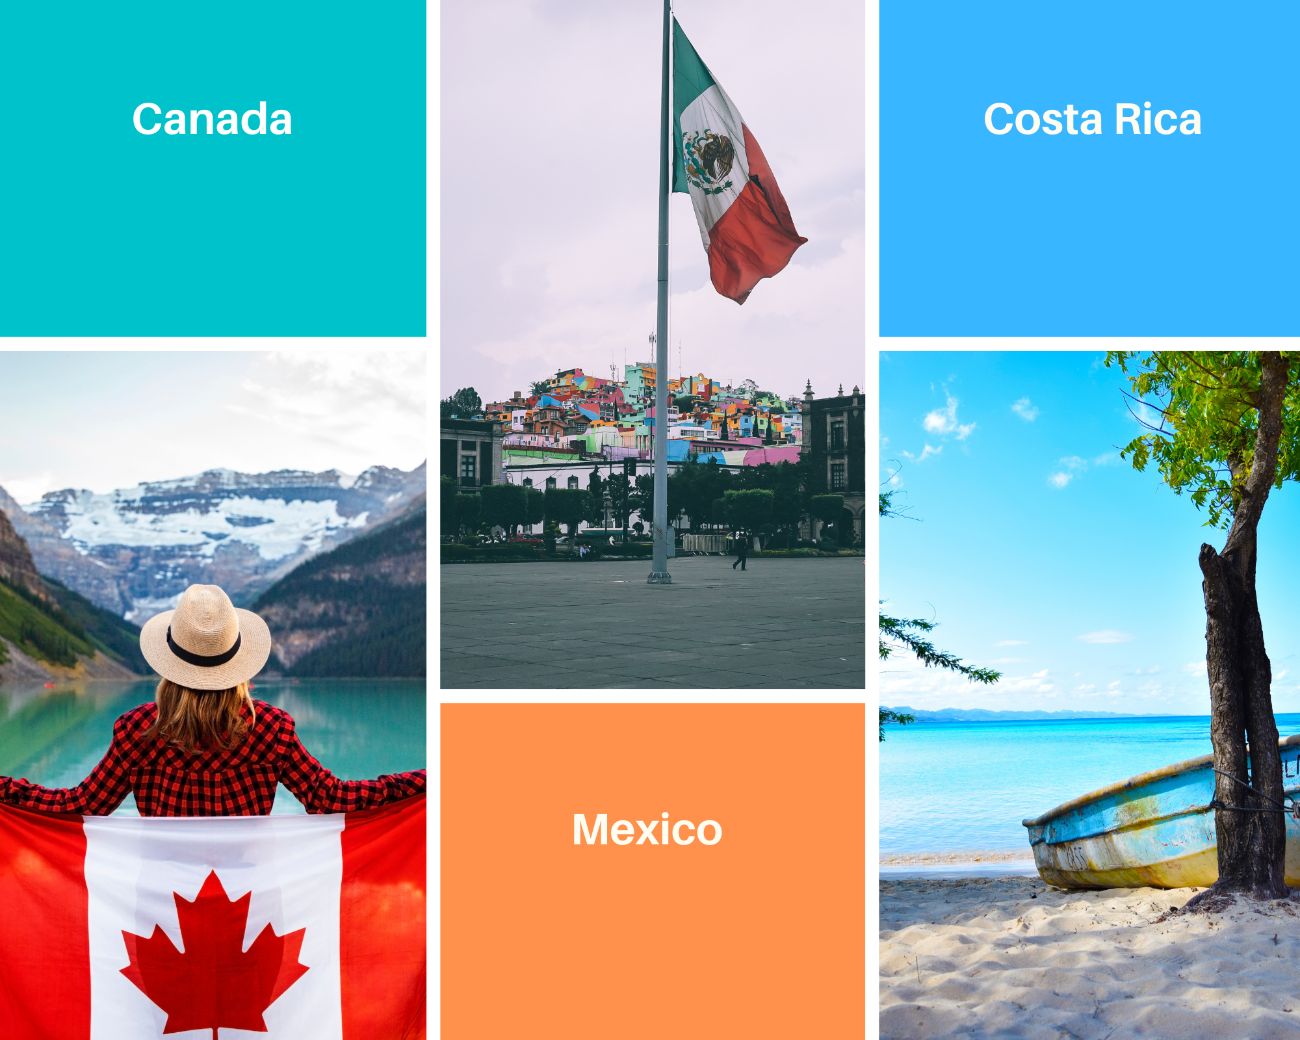 countries you can visit with green card